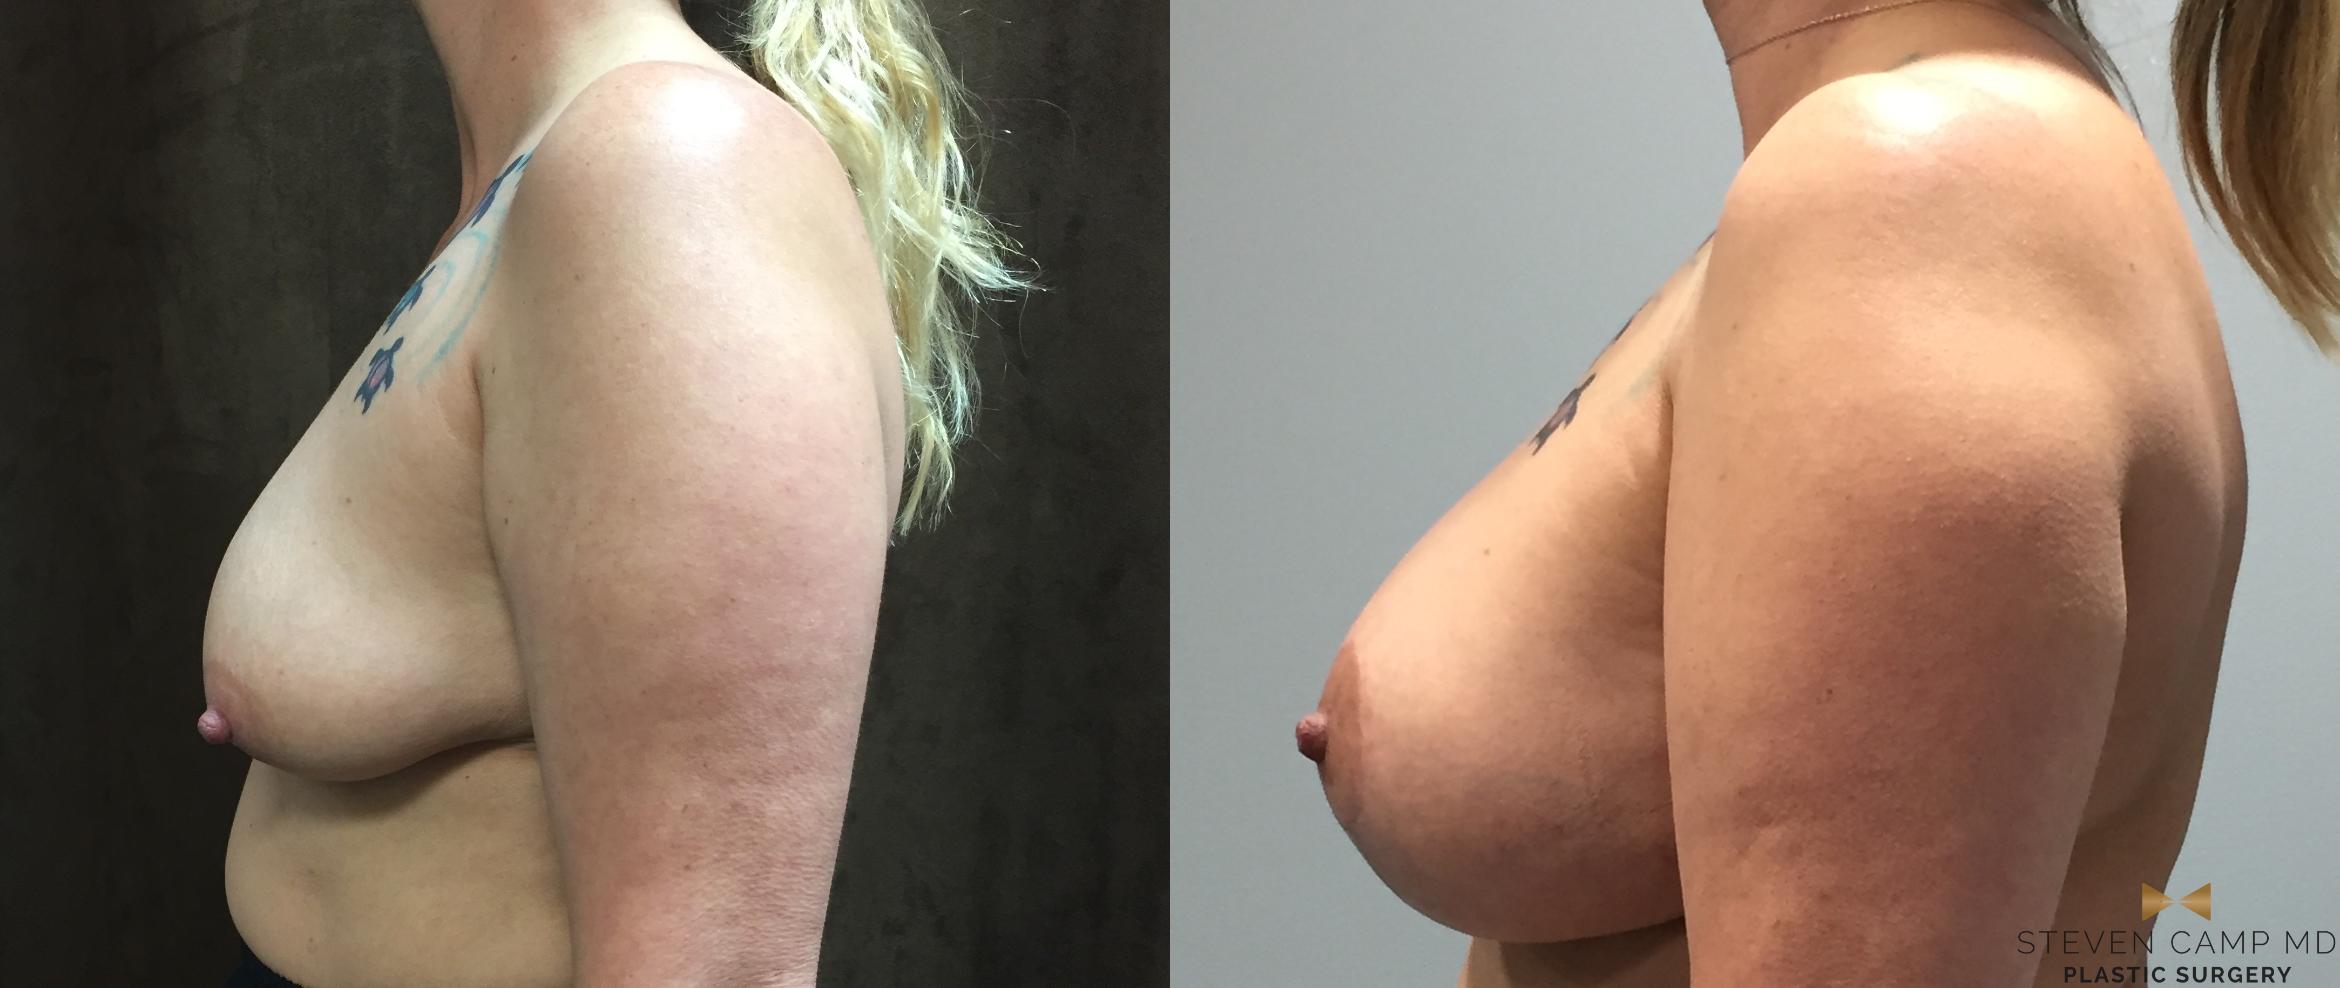 Breast Lift with or without Implants Before & After Photo | Fort Worth, Texas | Steven Camp MD Plastic Surgery